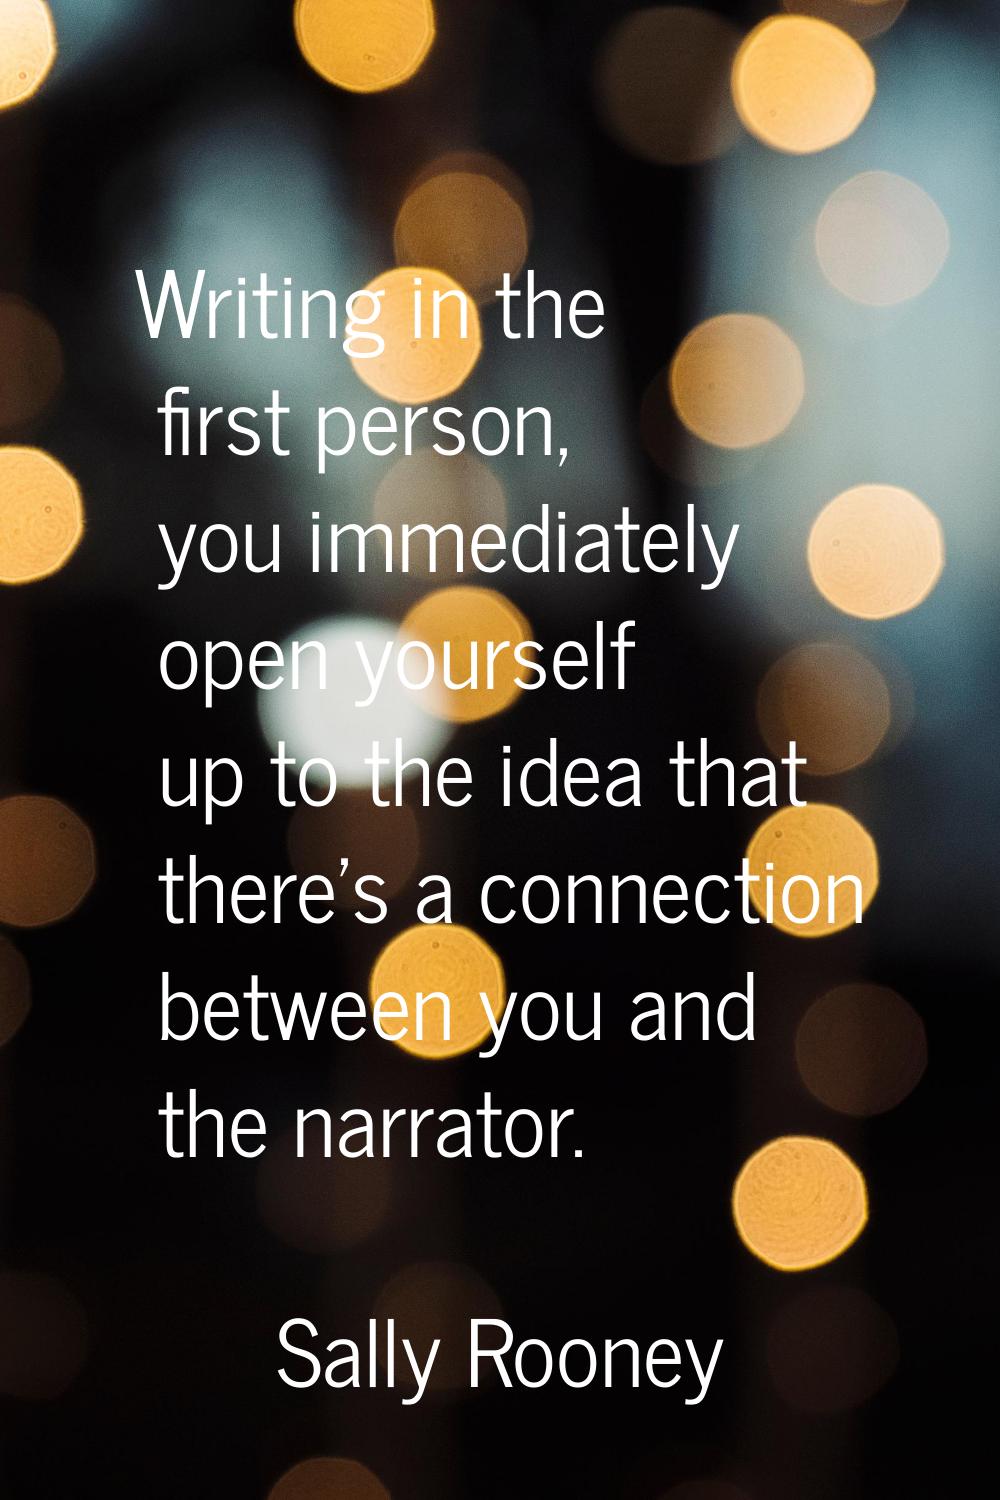 Writing in the first person, you immediately open yourself up to the idea that there's a connection